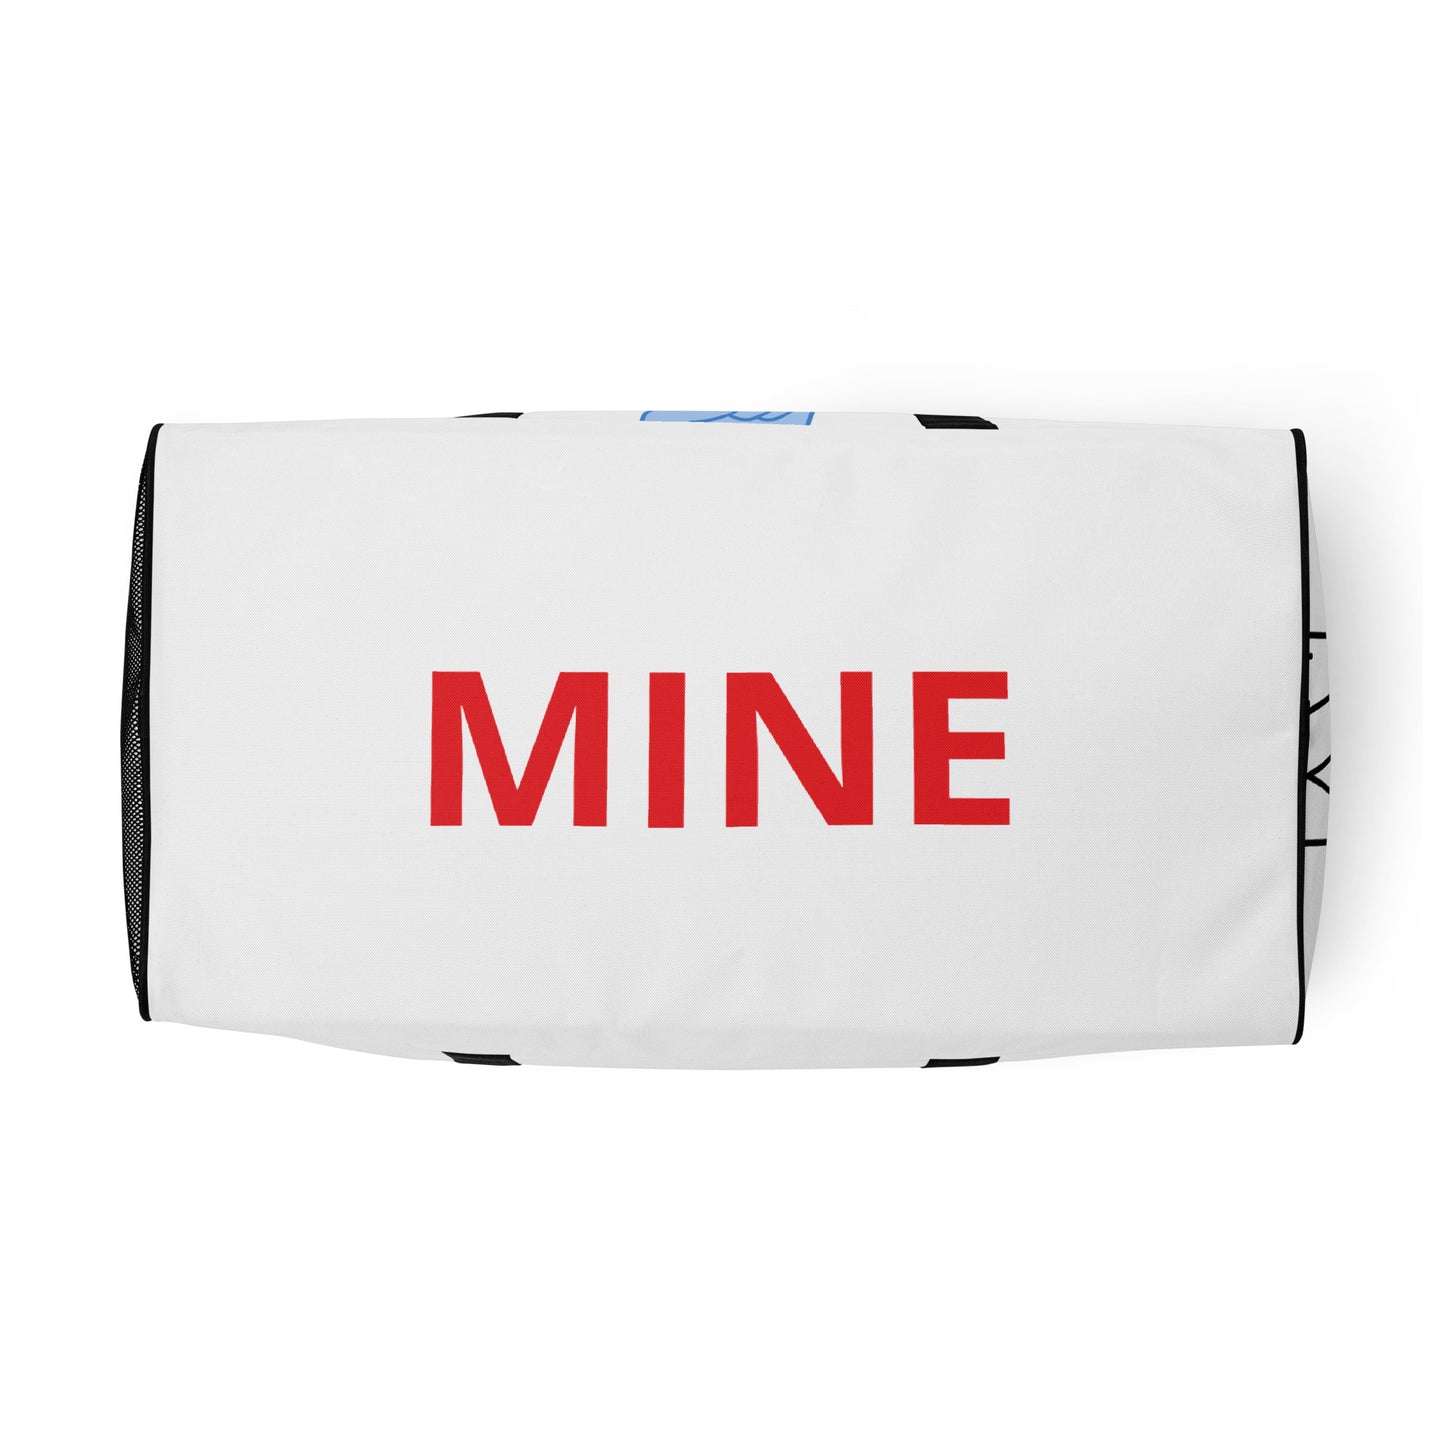 Bottom of the white duffle travel gym bag says "Mine" in red font